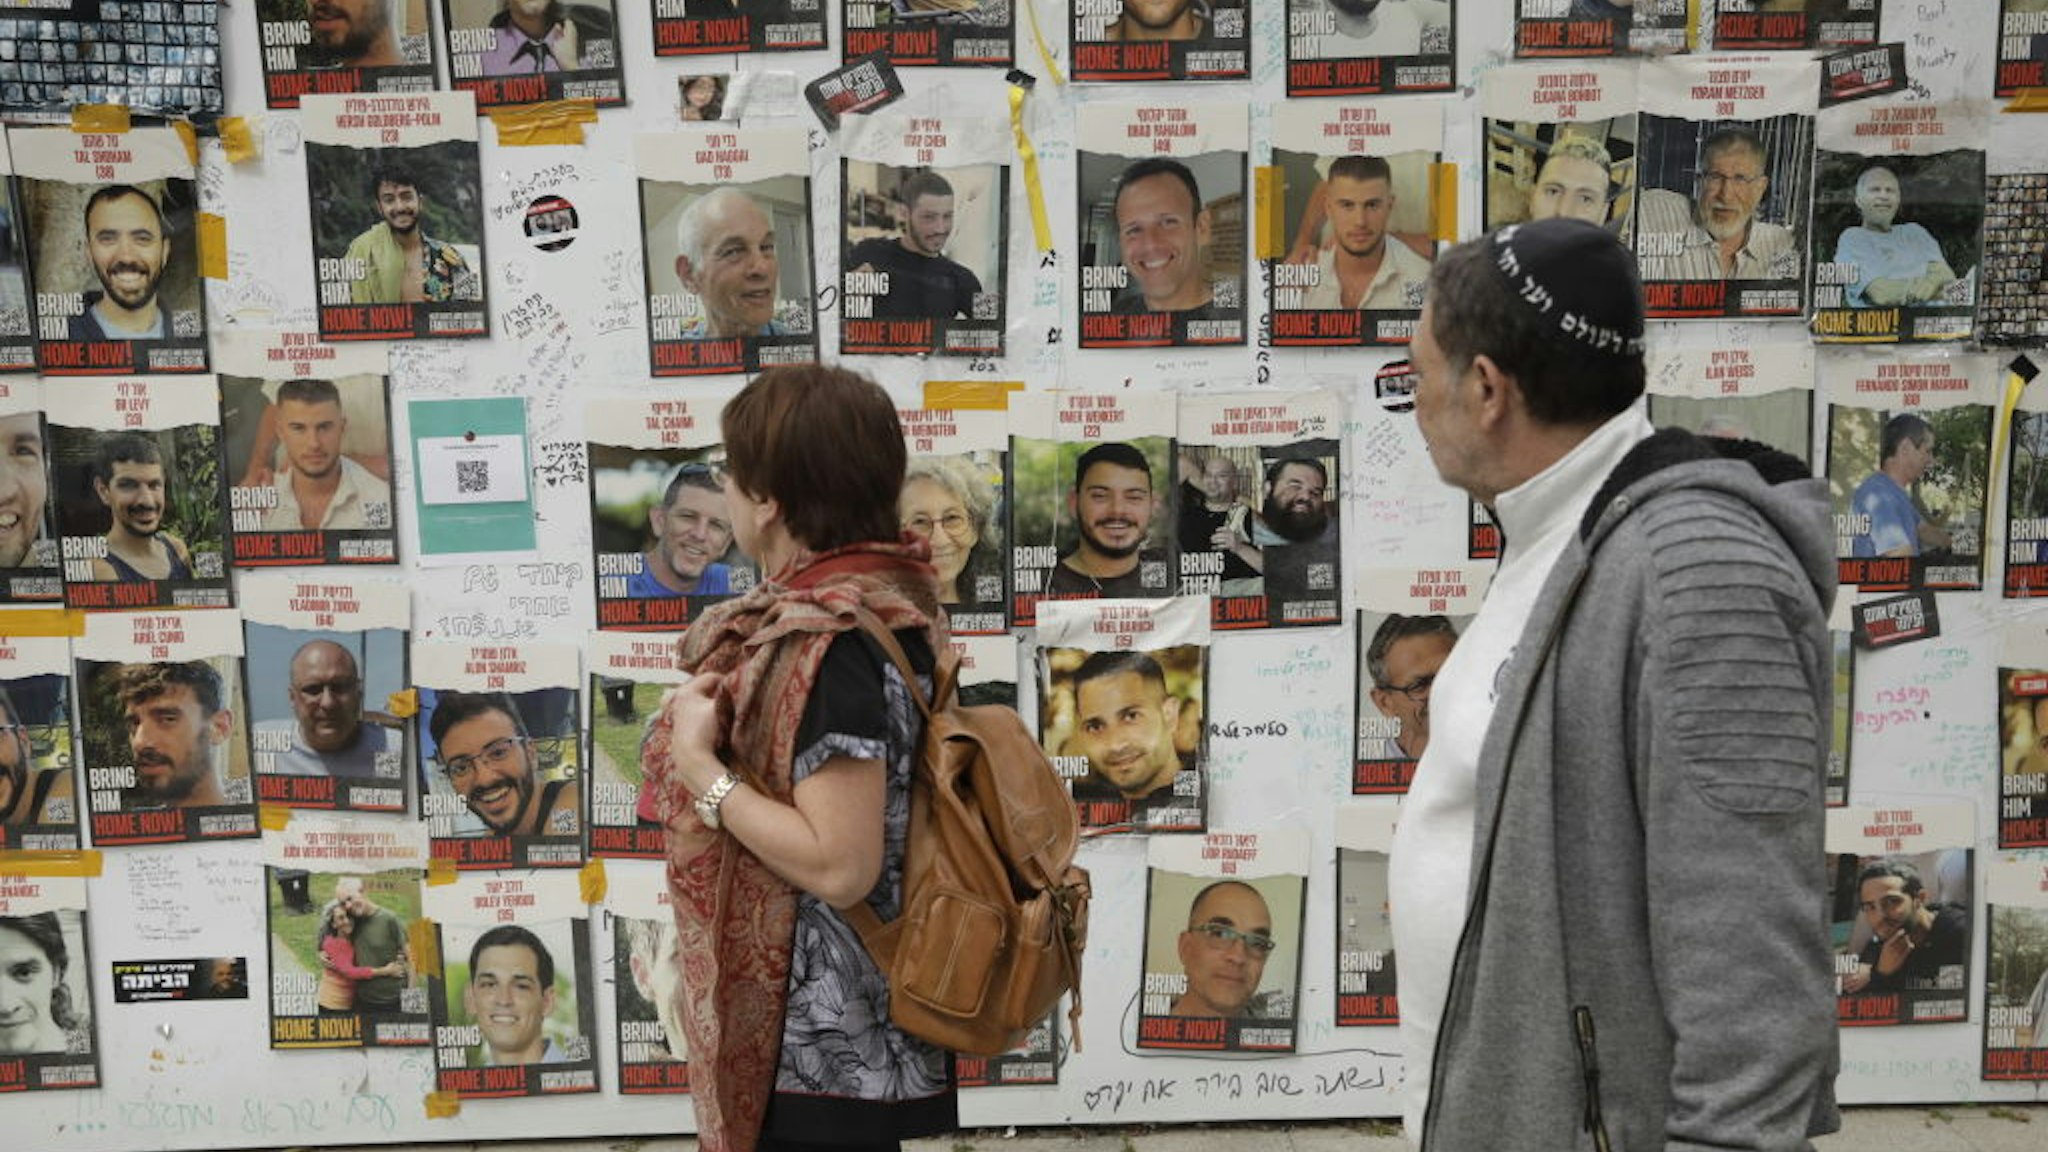 TEL AVIV, ISRAEL - FEBRUARY 12: People view posters of missing Israelis on a wall at Hostages Square on February 12, 2024 in Tel Aviv, Israel. The Israeli military says it has rescued two hostages from captivity in Rafah, whilst two 21-year old IDF soldiers were killed in overnight fighting in the Gaza Strip. The IDF has now rescued three hostages through military operations since Oct. 7, as PM Netanyahu faces pressure from relatives of freed hostages to secure the release of the remaining captives through negations with Hamas. (Photo by Amir Levy/Getty Images)